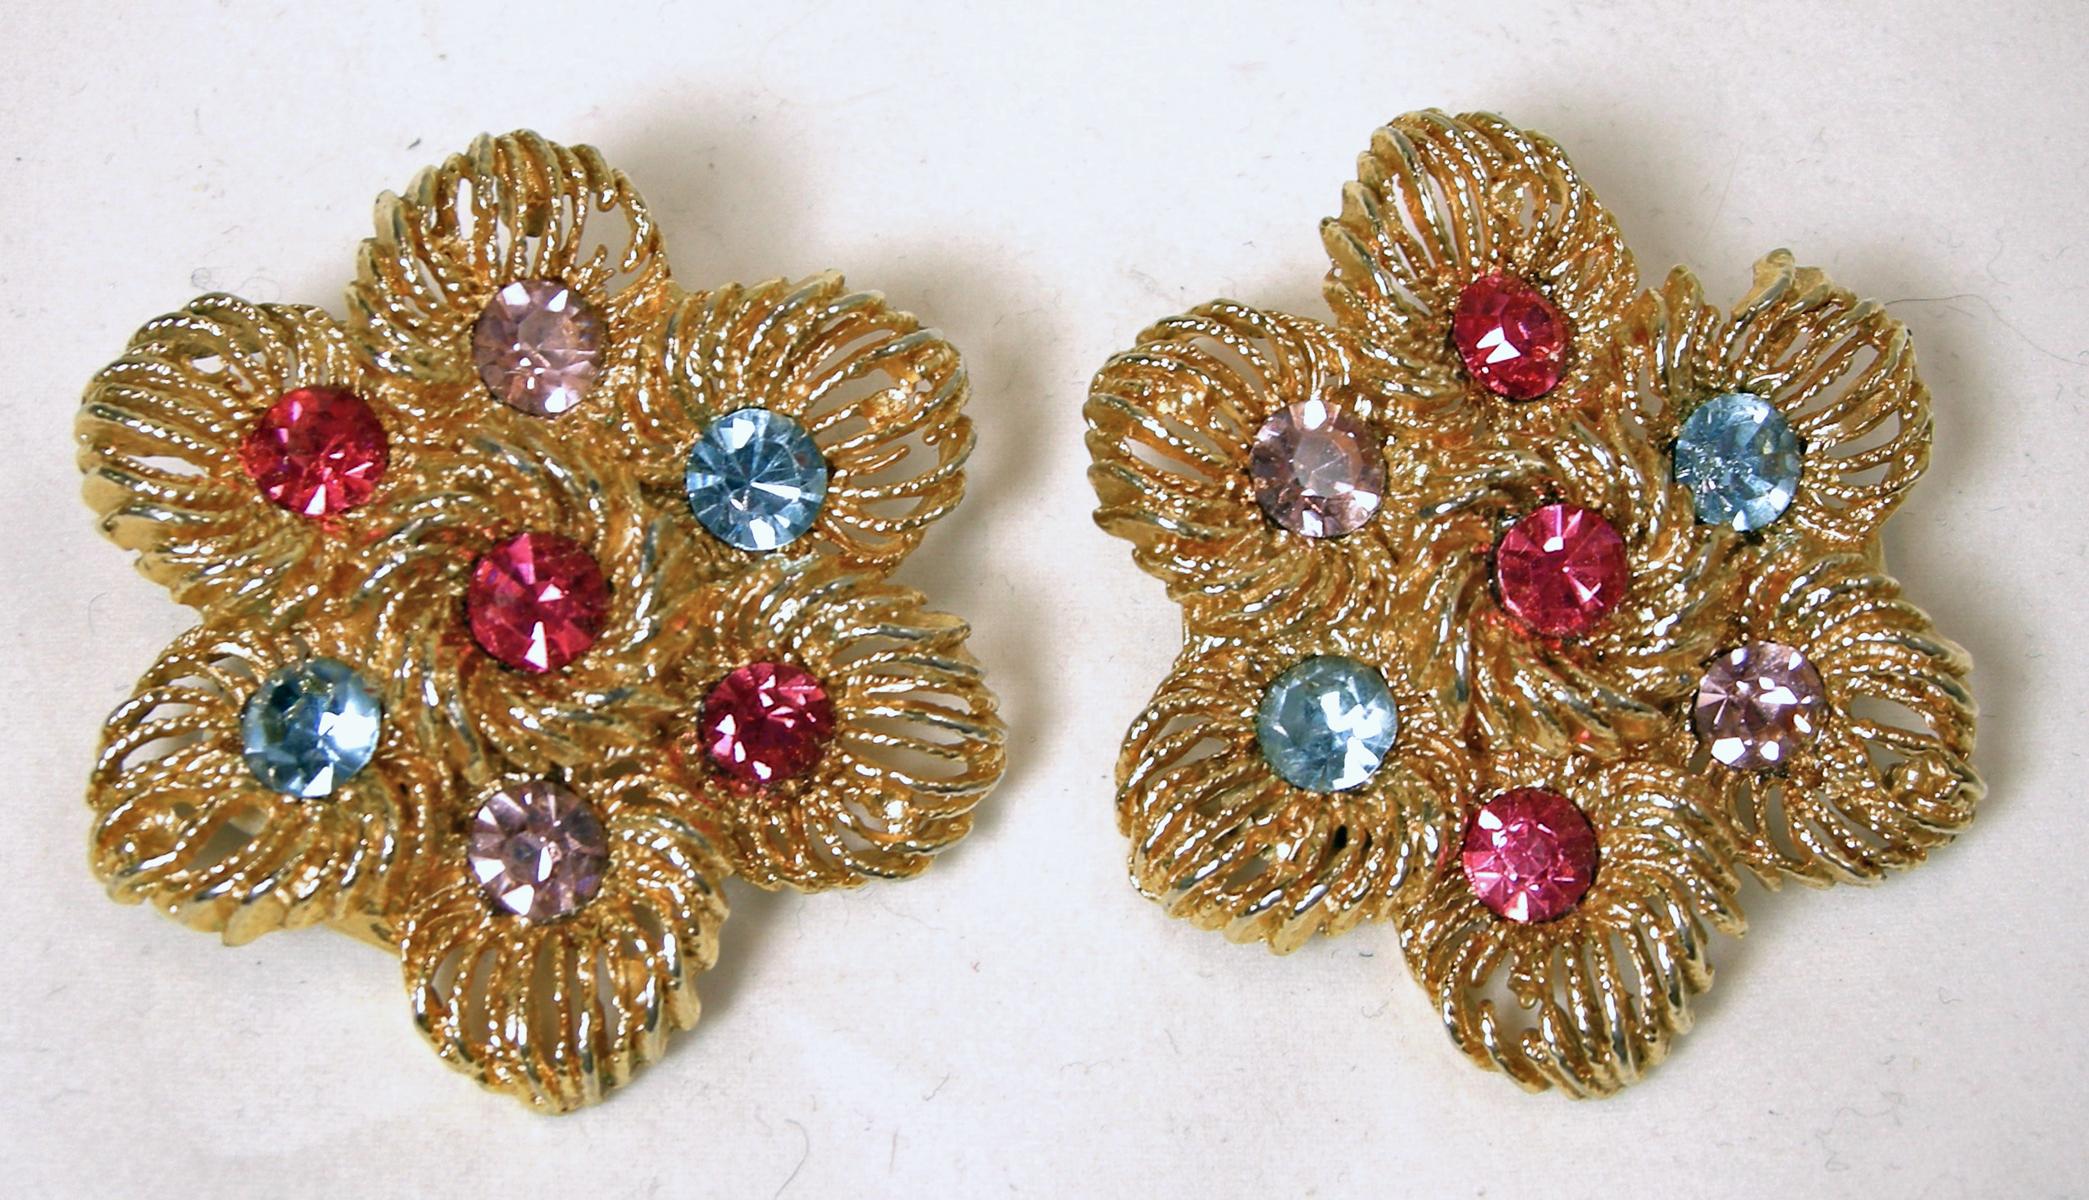 These vintage 1970’s earrings have multi-color crystals in a gold tone setting.  In excellent condition, these clip earrings measure 1-3/4” across/diameter.